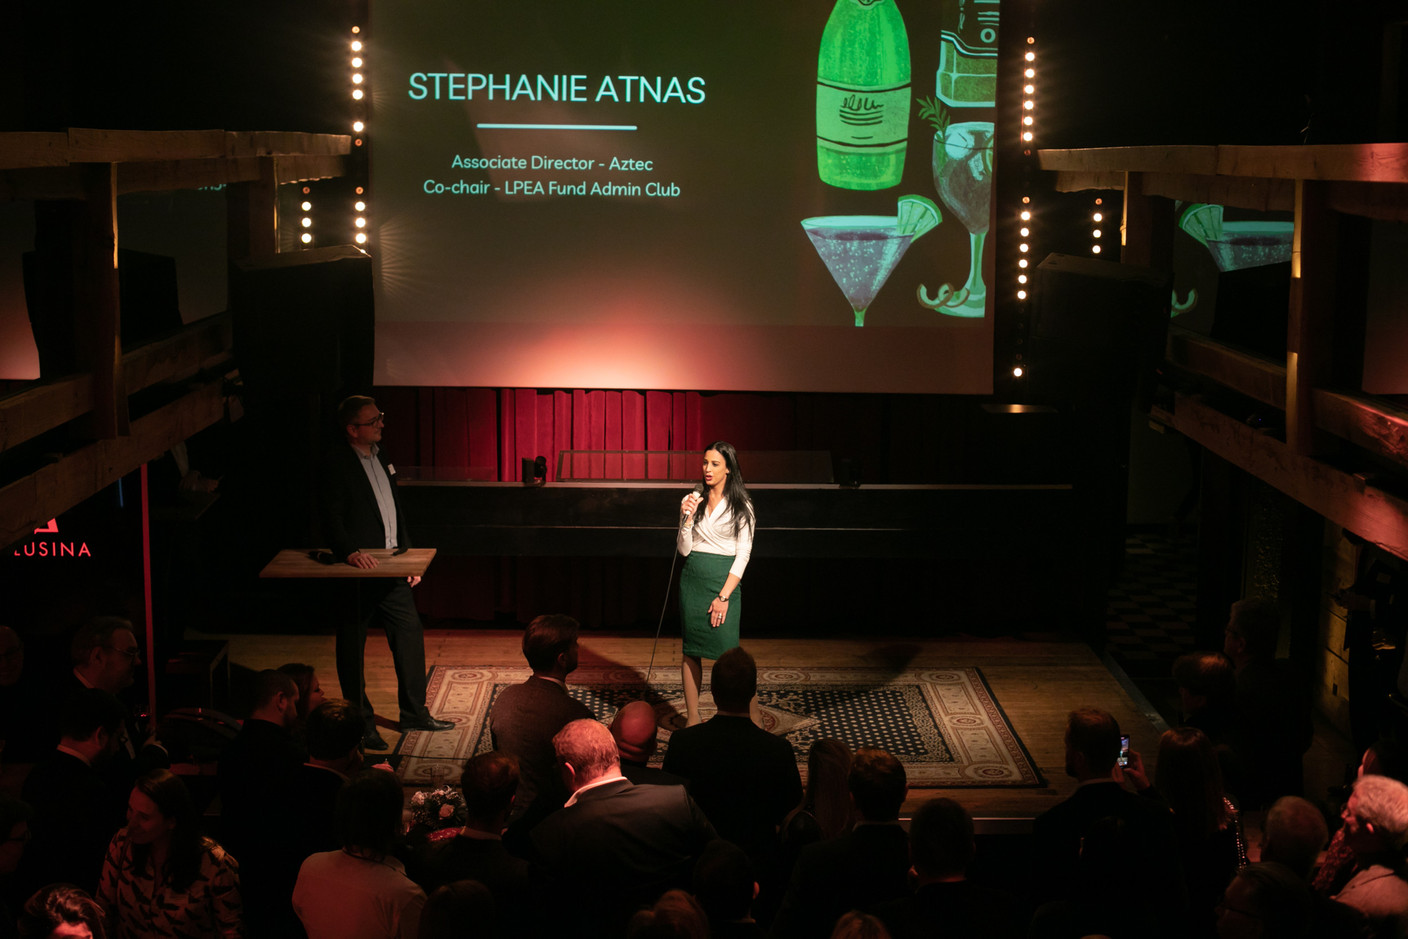 Stephanie Atnas, Aztec's associate director and co-chair of the LPEA Fund Admin Club, speaking at the LPEA's New Year's event. The reception took place on 19 January 2023 at Melusina. Matic Zorman / Maison Moderne